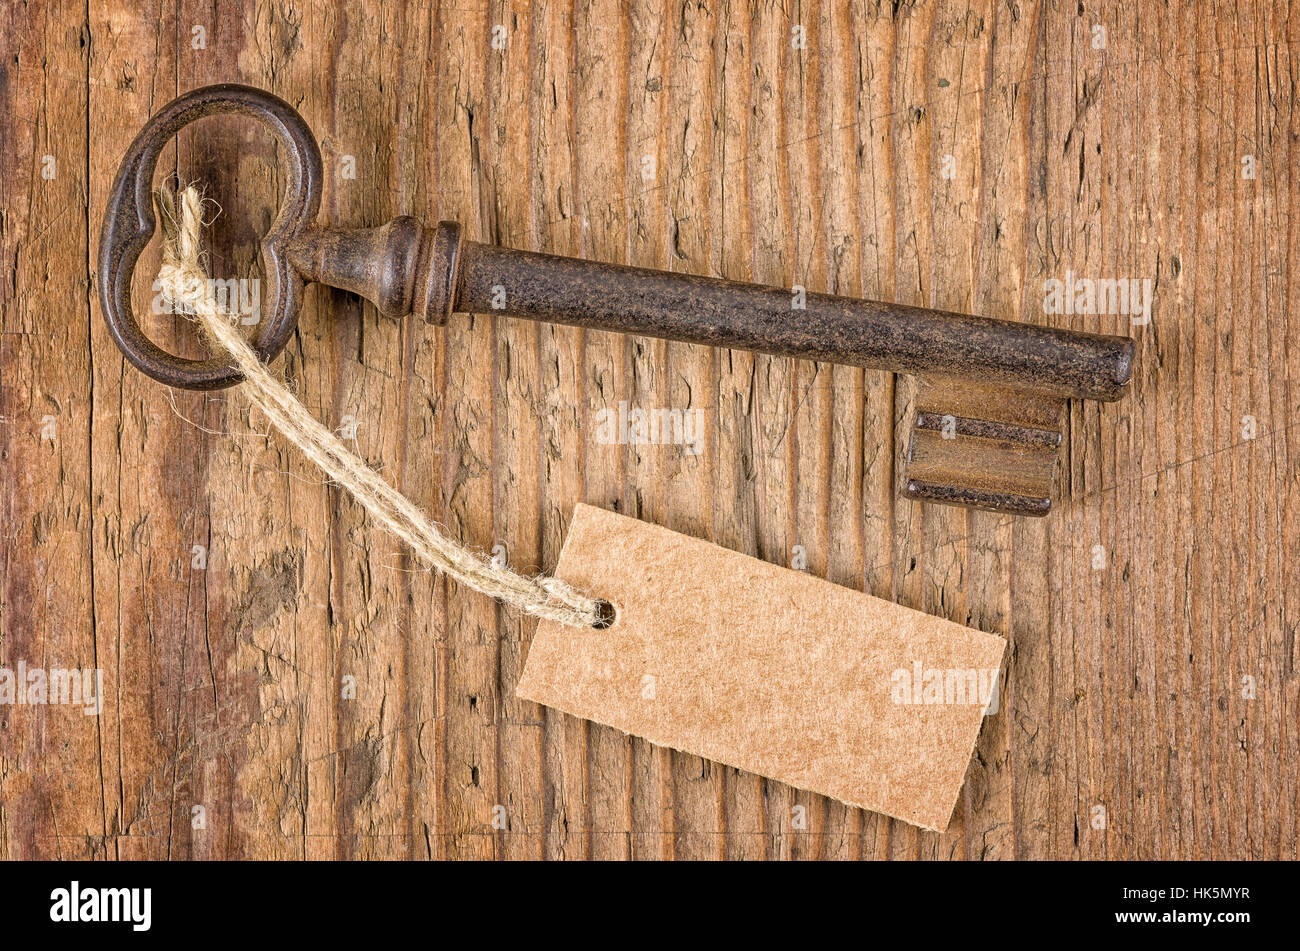 old key with pendant on a wooden board Stock Photo